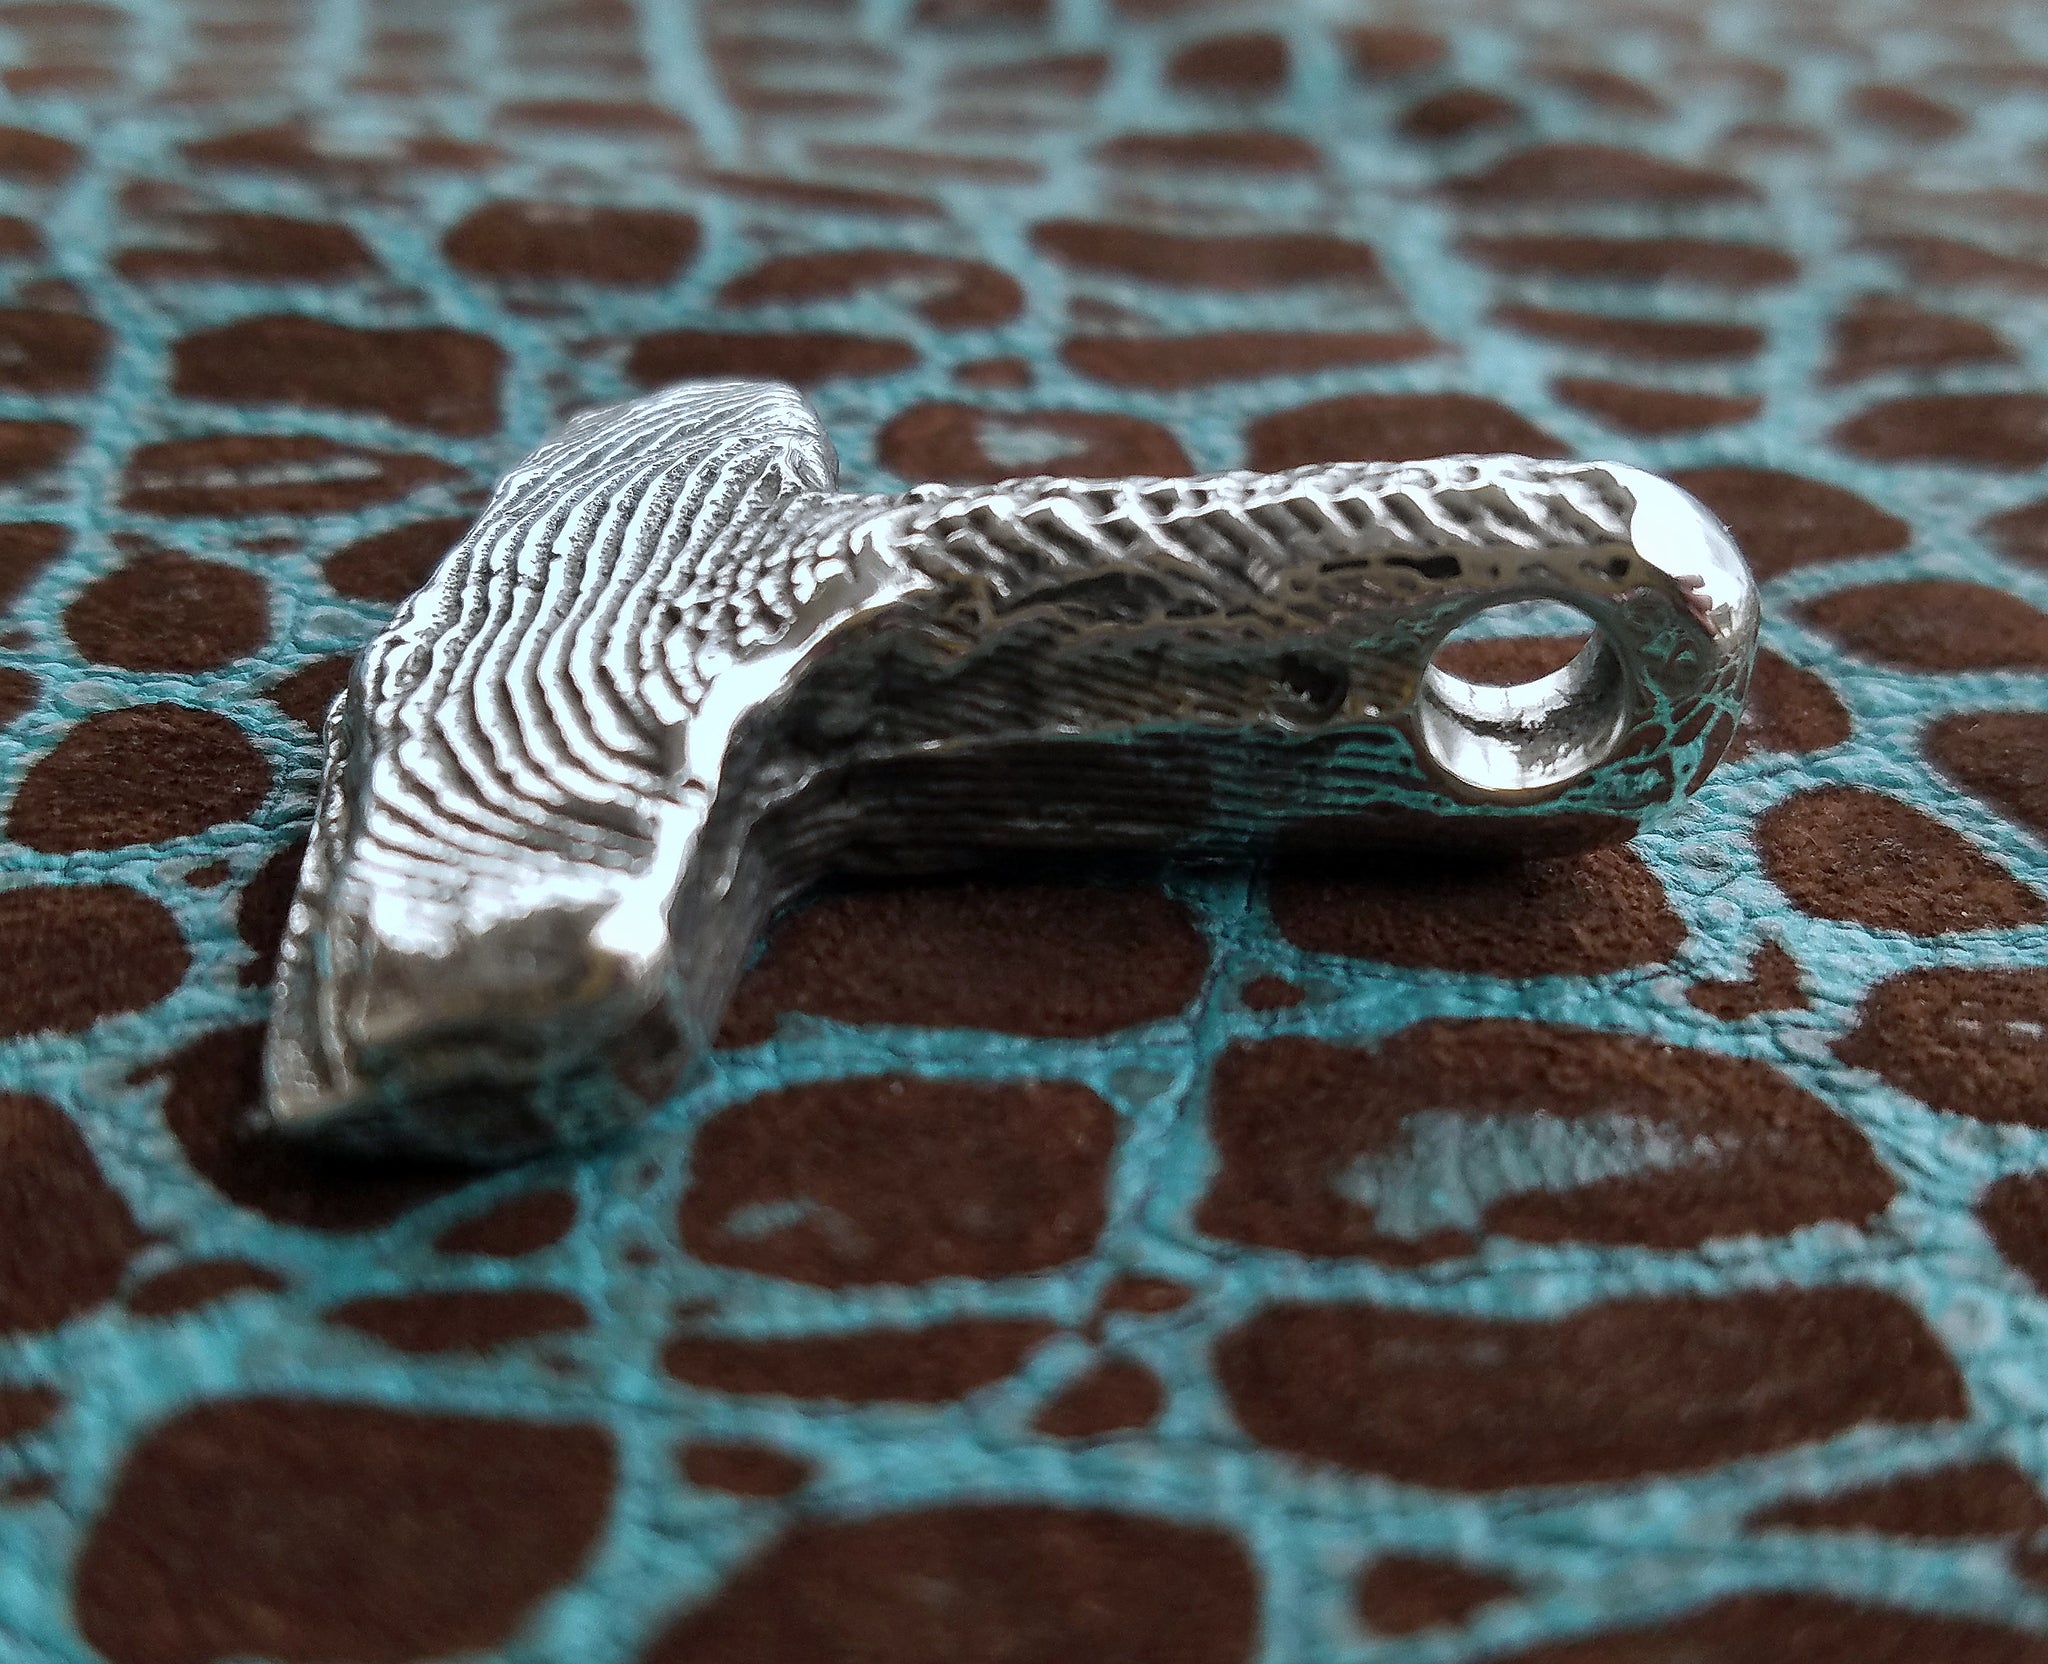 'Thor's Hammer' Hand-carved Hand-poured Cuttlefish Cast Pendant #2 by Phantom